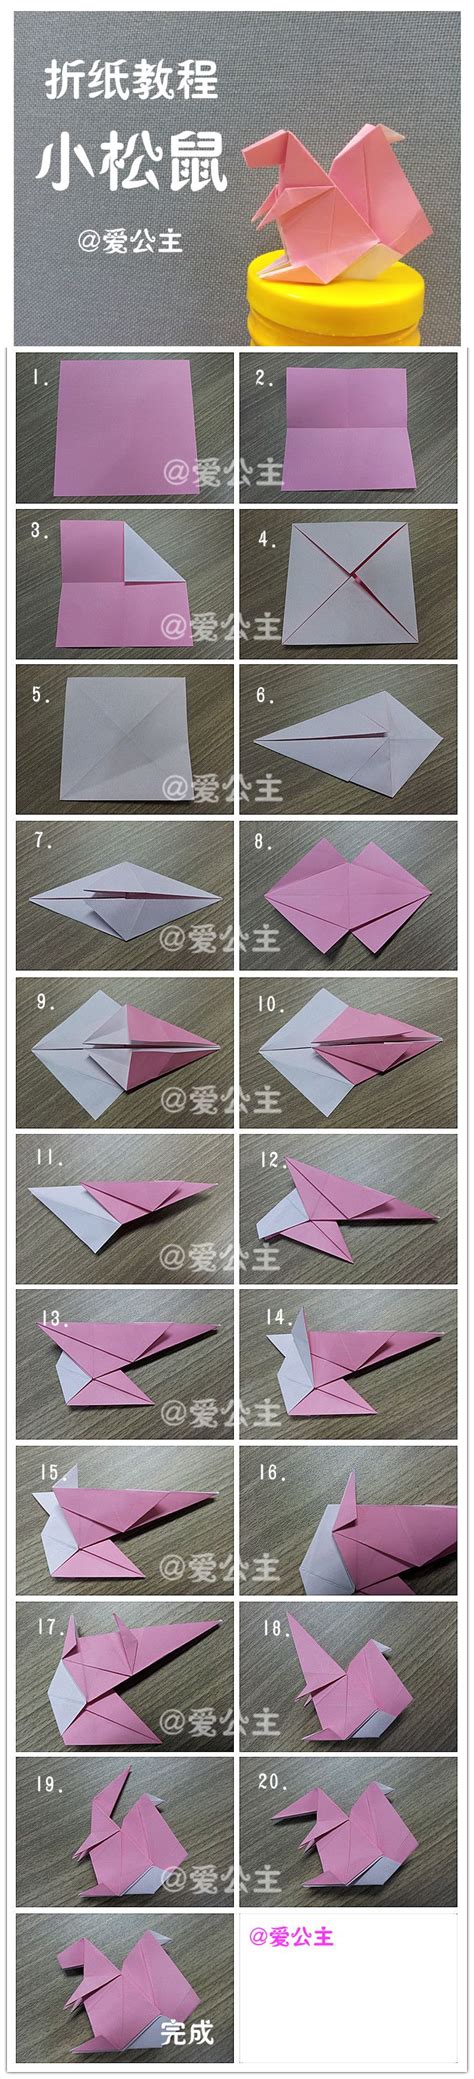 17 Best images about Origami on Pinterest | Folding ...